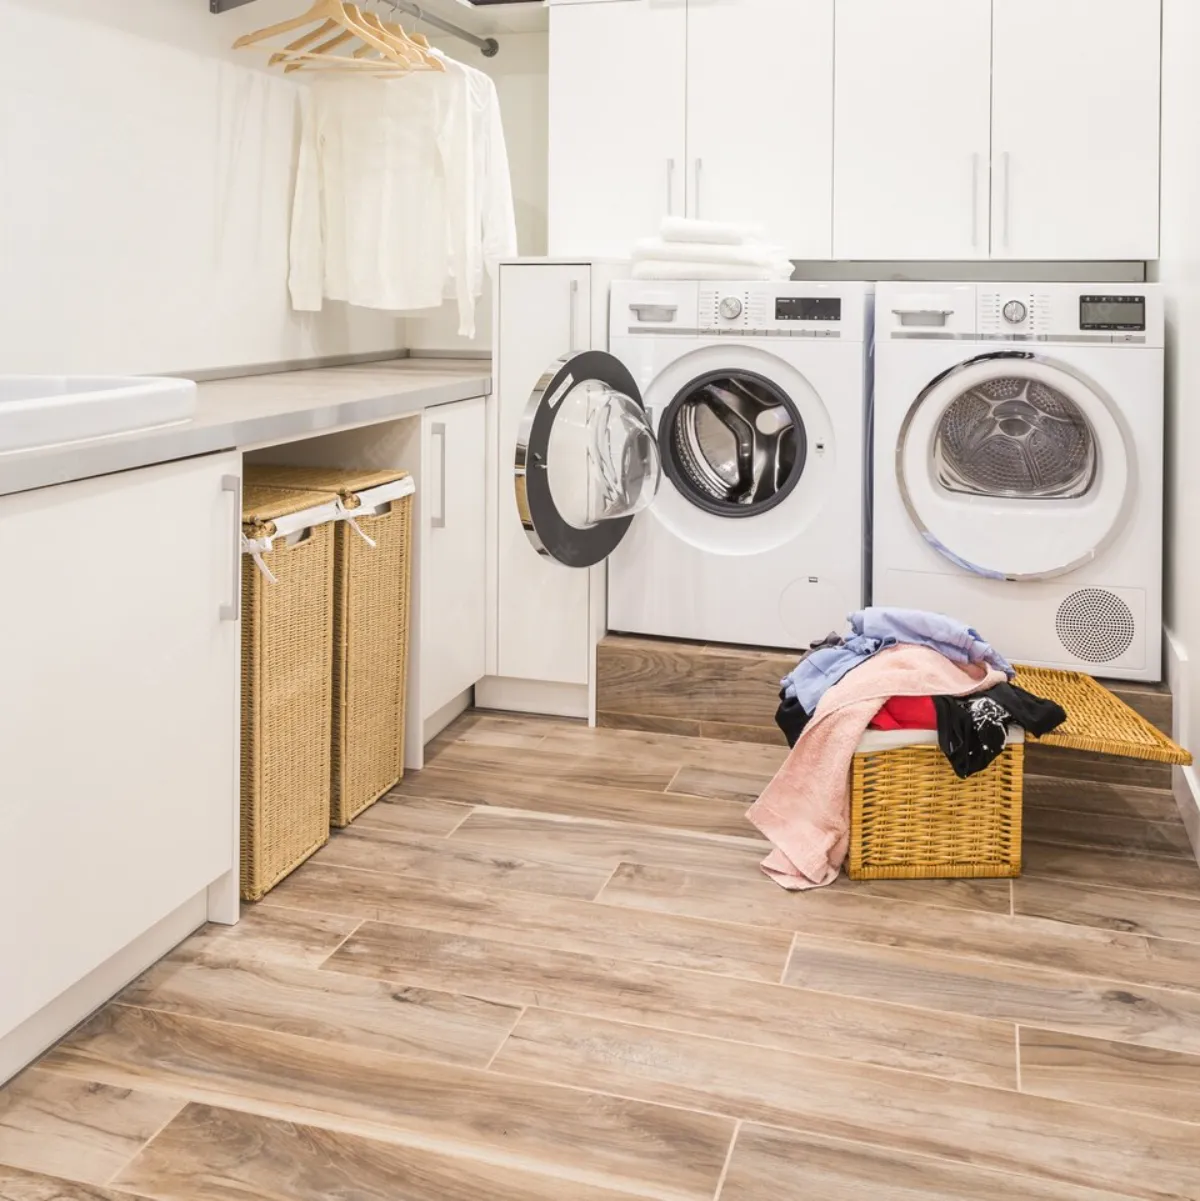 Electrolux dryer in laundry room